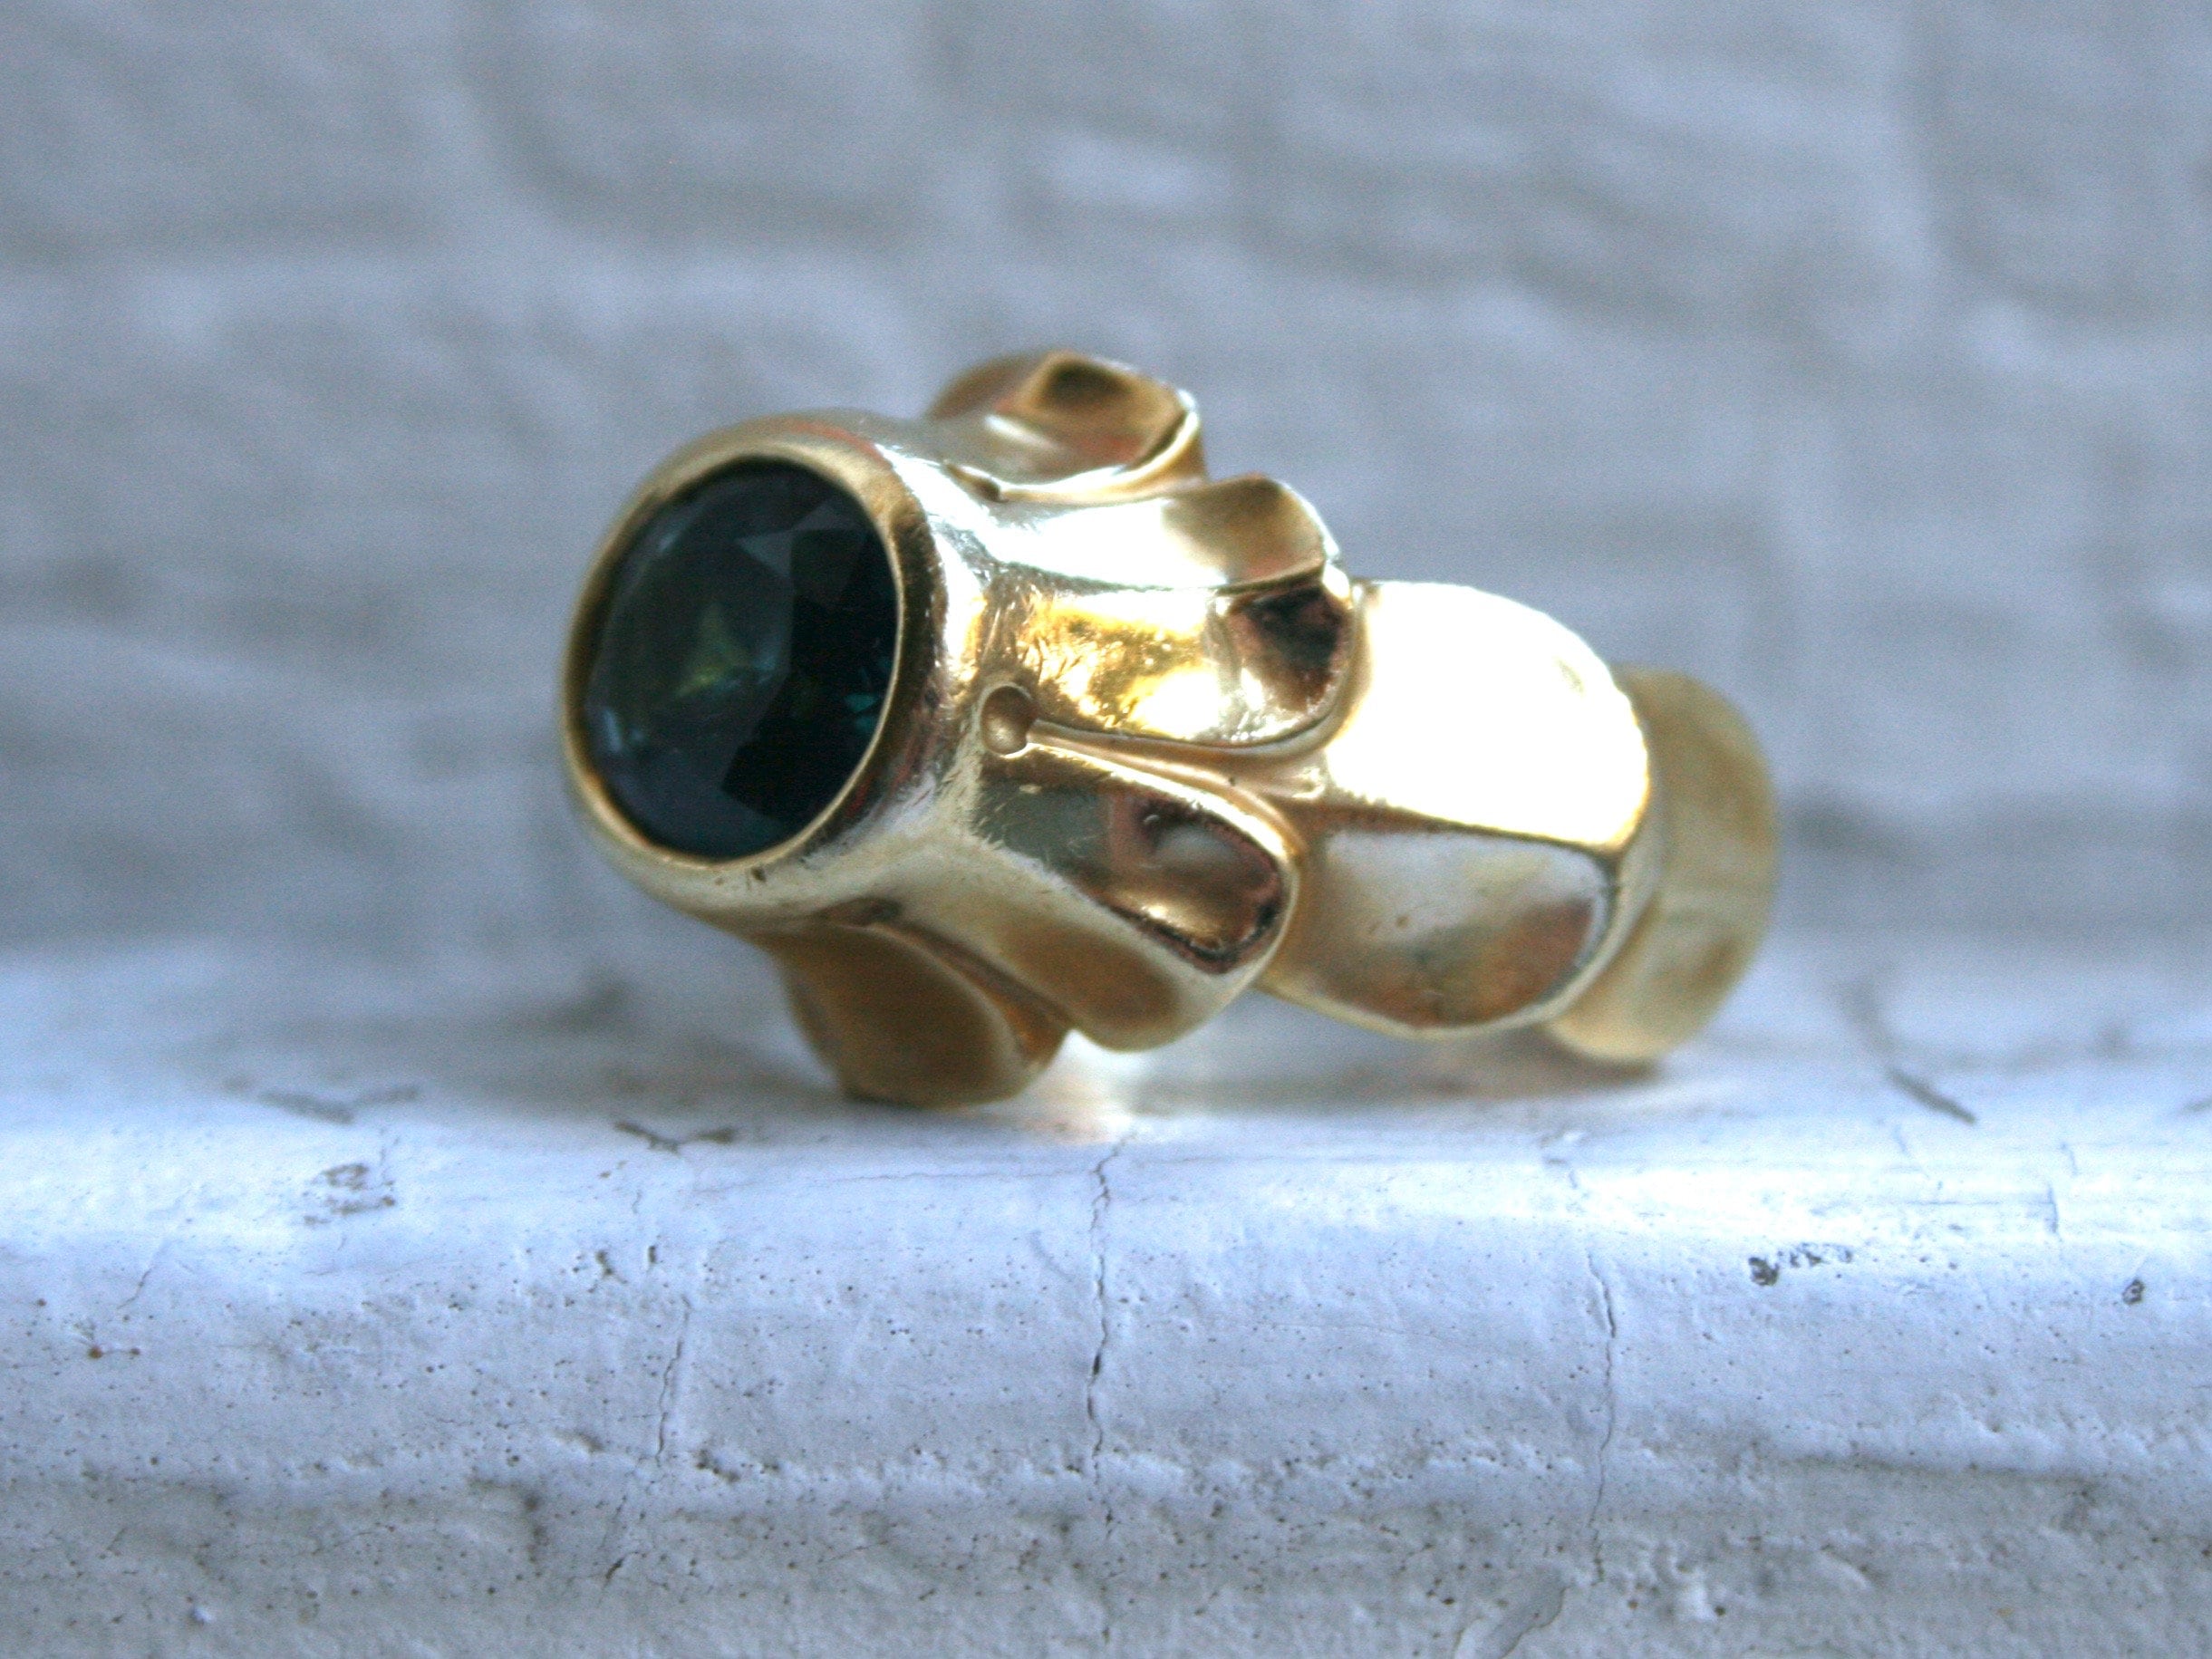 Heavy Vintage 18K Yellow Gold Green Tourmaline Ring by Elizabeth Rand - 3.25ct.